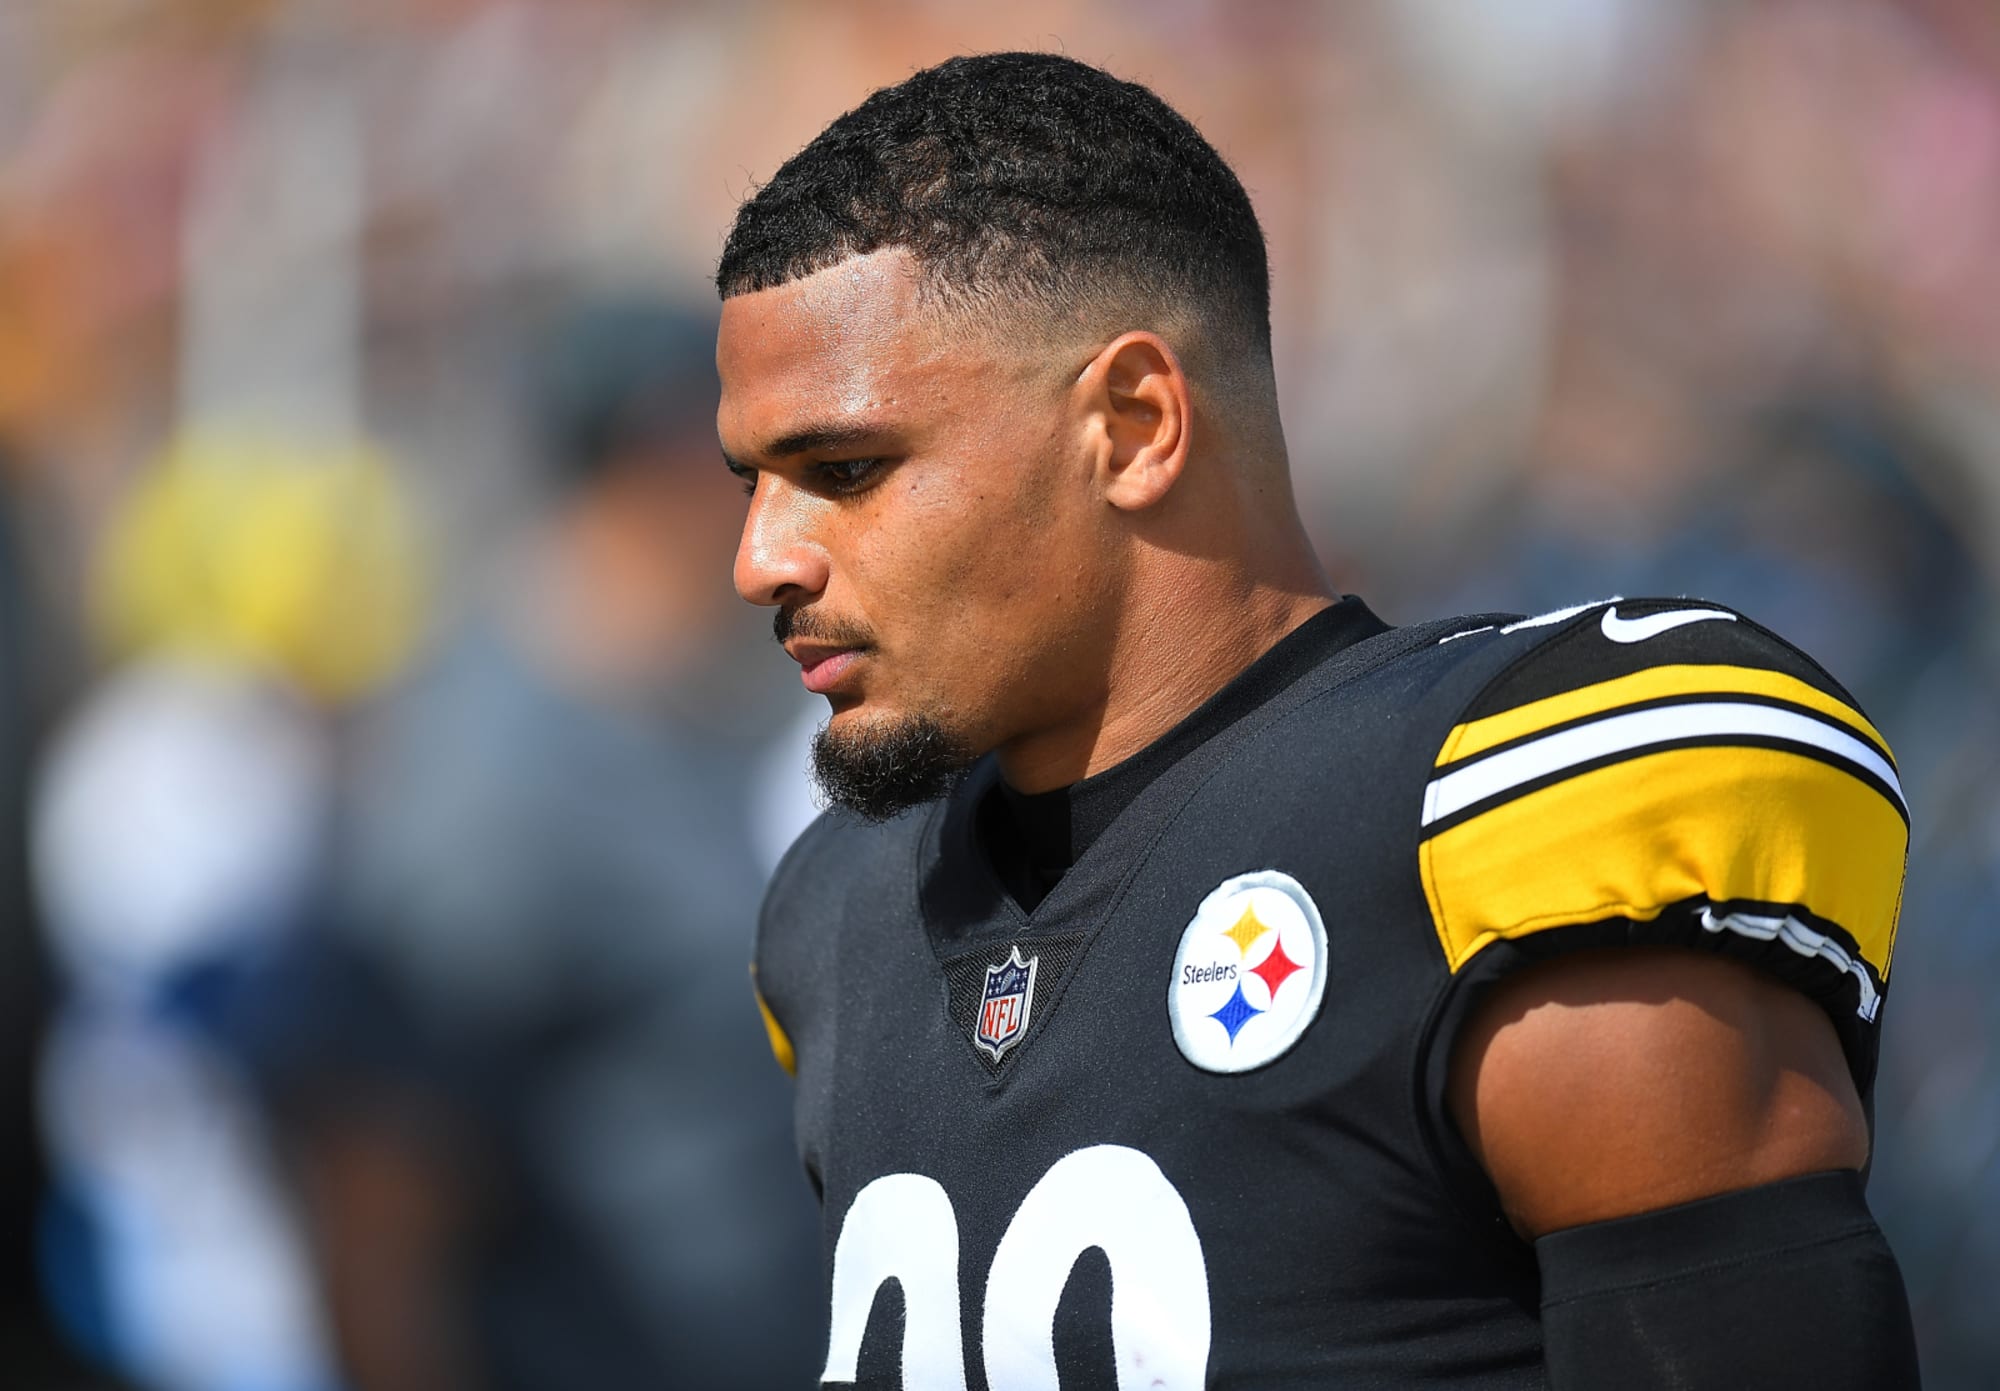 Steelers expected to make Minkah Fitzpatrick highest-paid safety in NFL